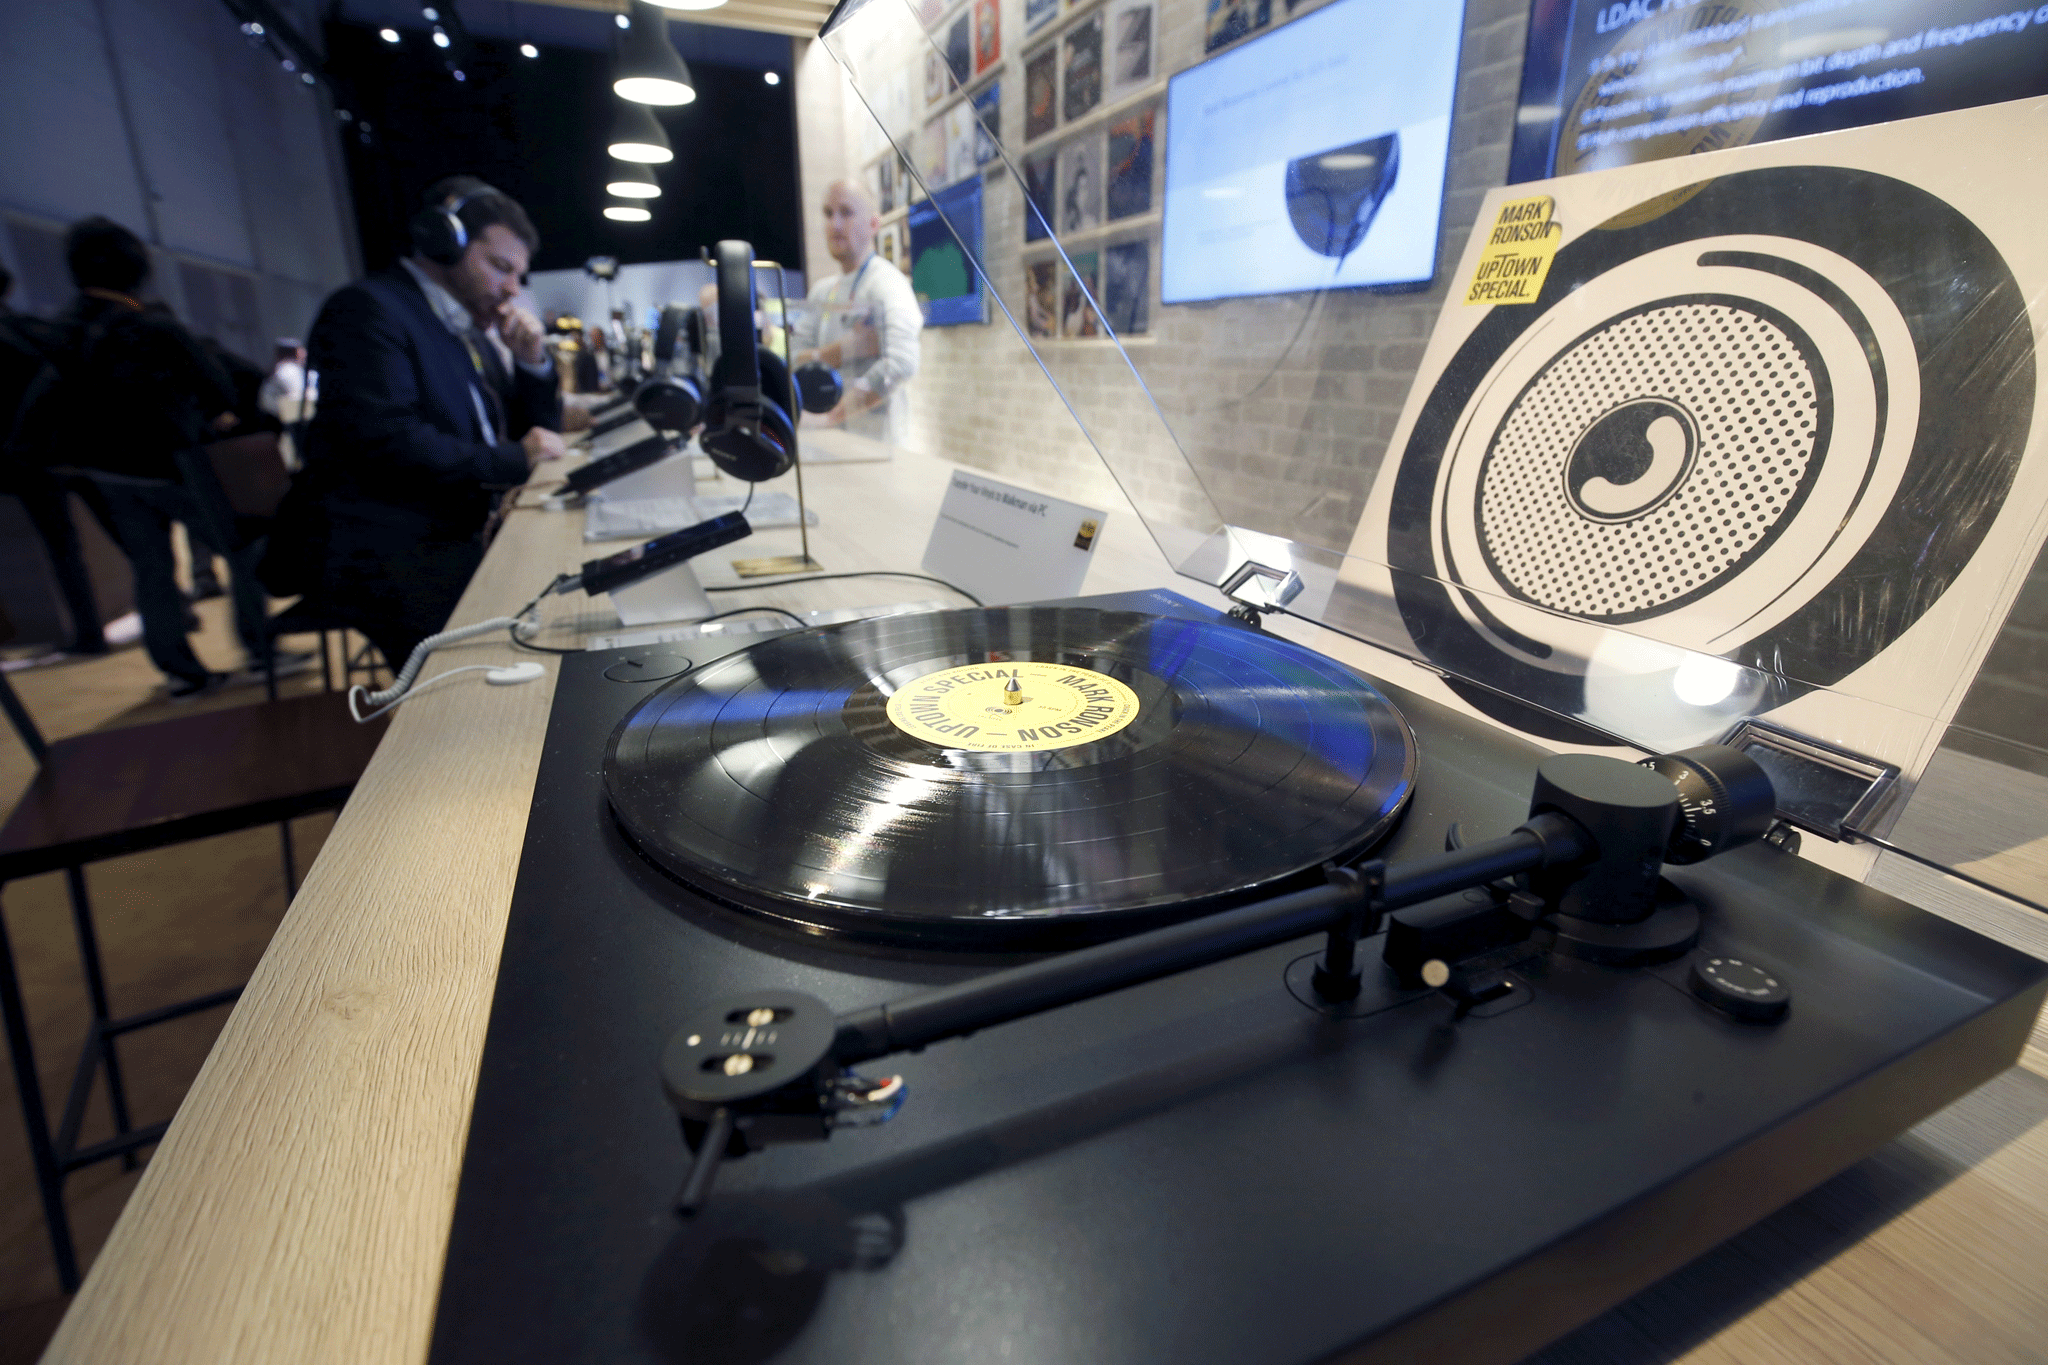 Vinyl sales have continued to surge as a more tangible alternative to digital streaming